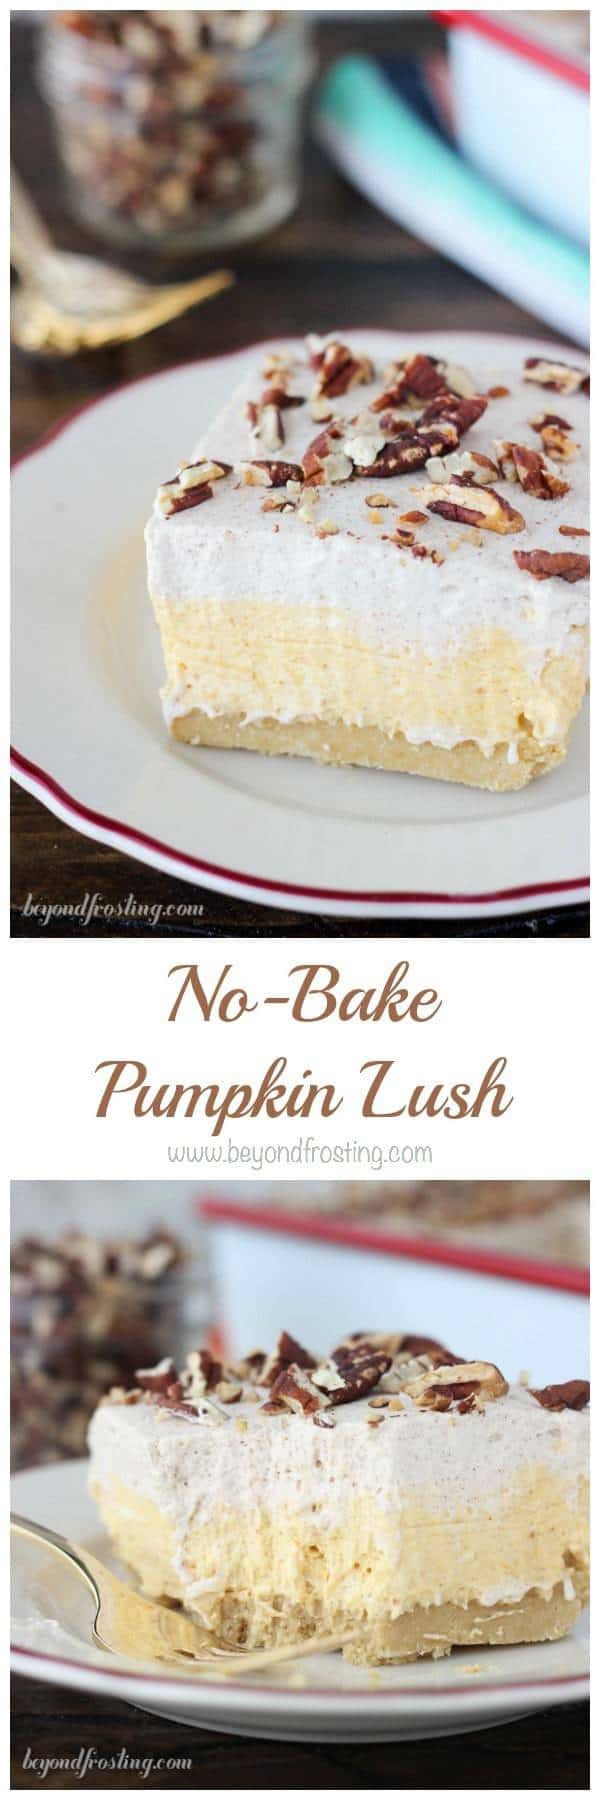 This No-Bake Pumpkin Lush Icebox Cake is a thick Golden Oreo crust with a pumpkin cheesecake filling and a cinnamon maple whipped cream on top. Just 30 minutes is all you need to throw this together and then toss it in the refrigerator until you’re ready to serve dessert.